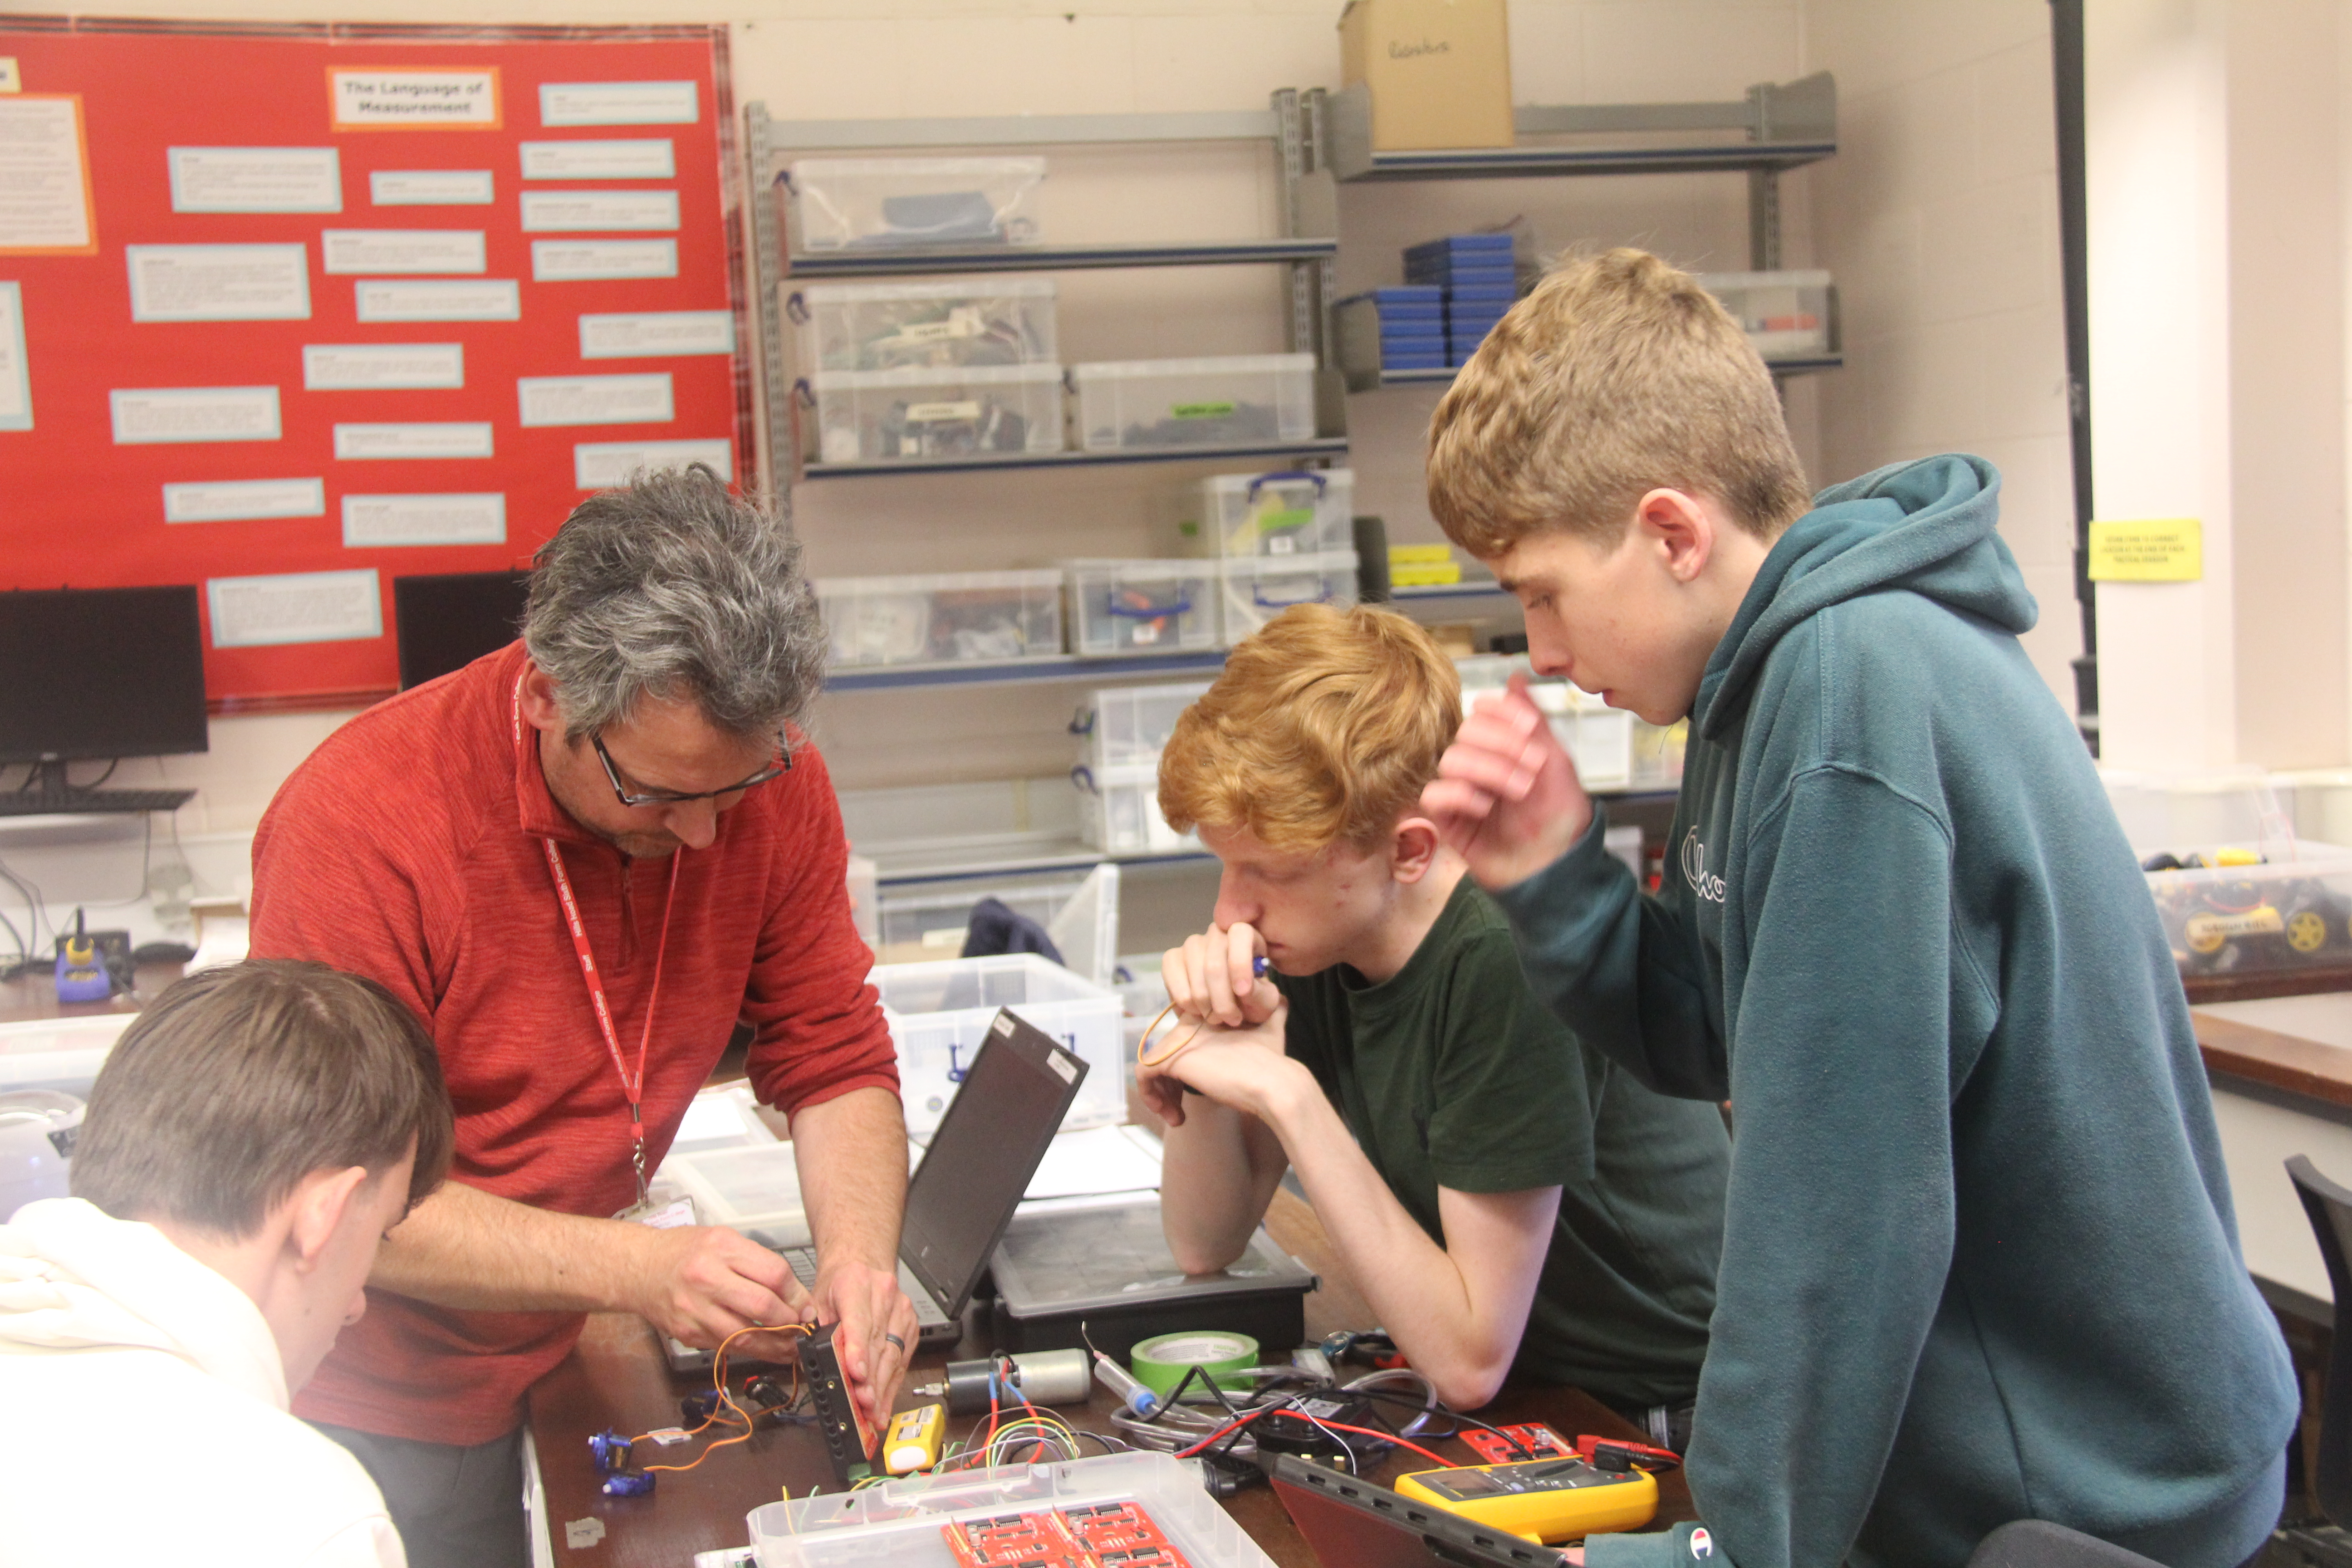 Soldering and problem solving group